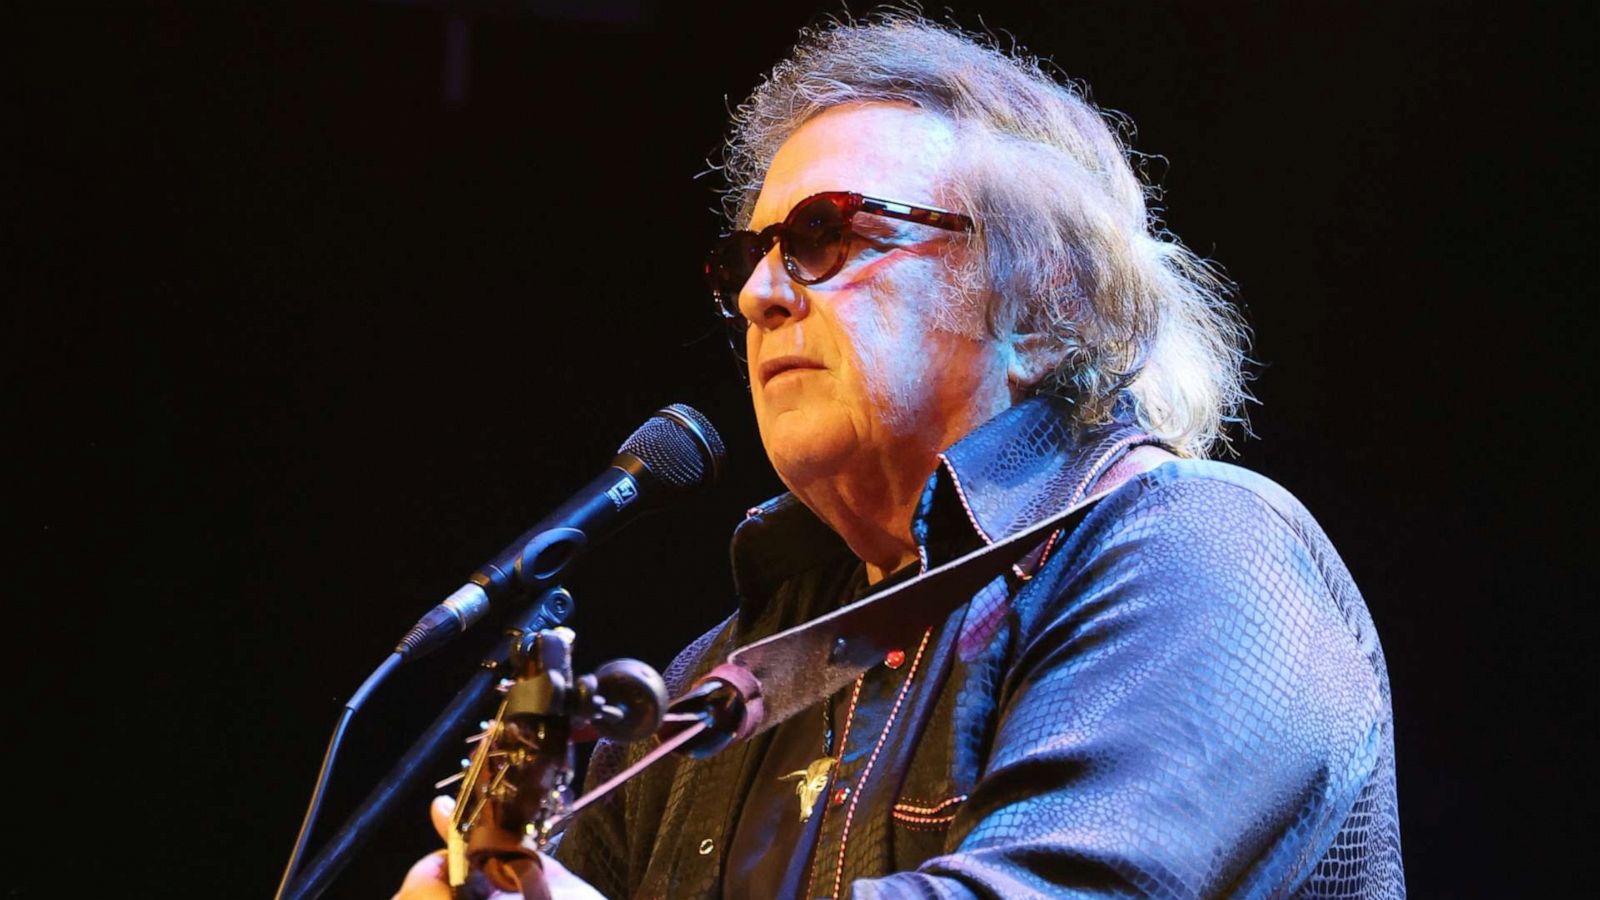 PHOTO: Singer & songwriter Don McLean performs at the Ryman Auditorium, May 12, 2022, in Nashville, Tenn.